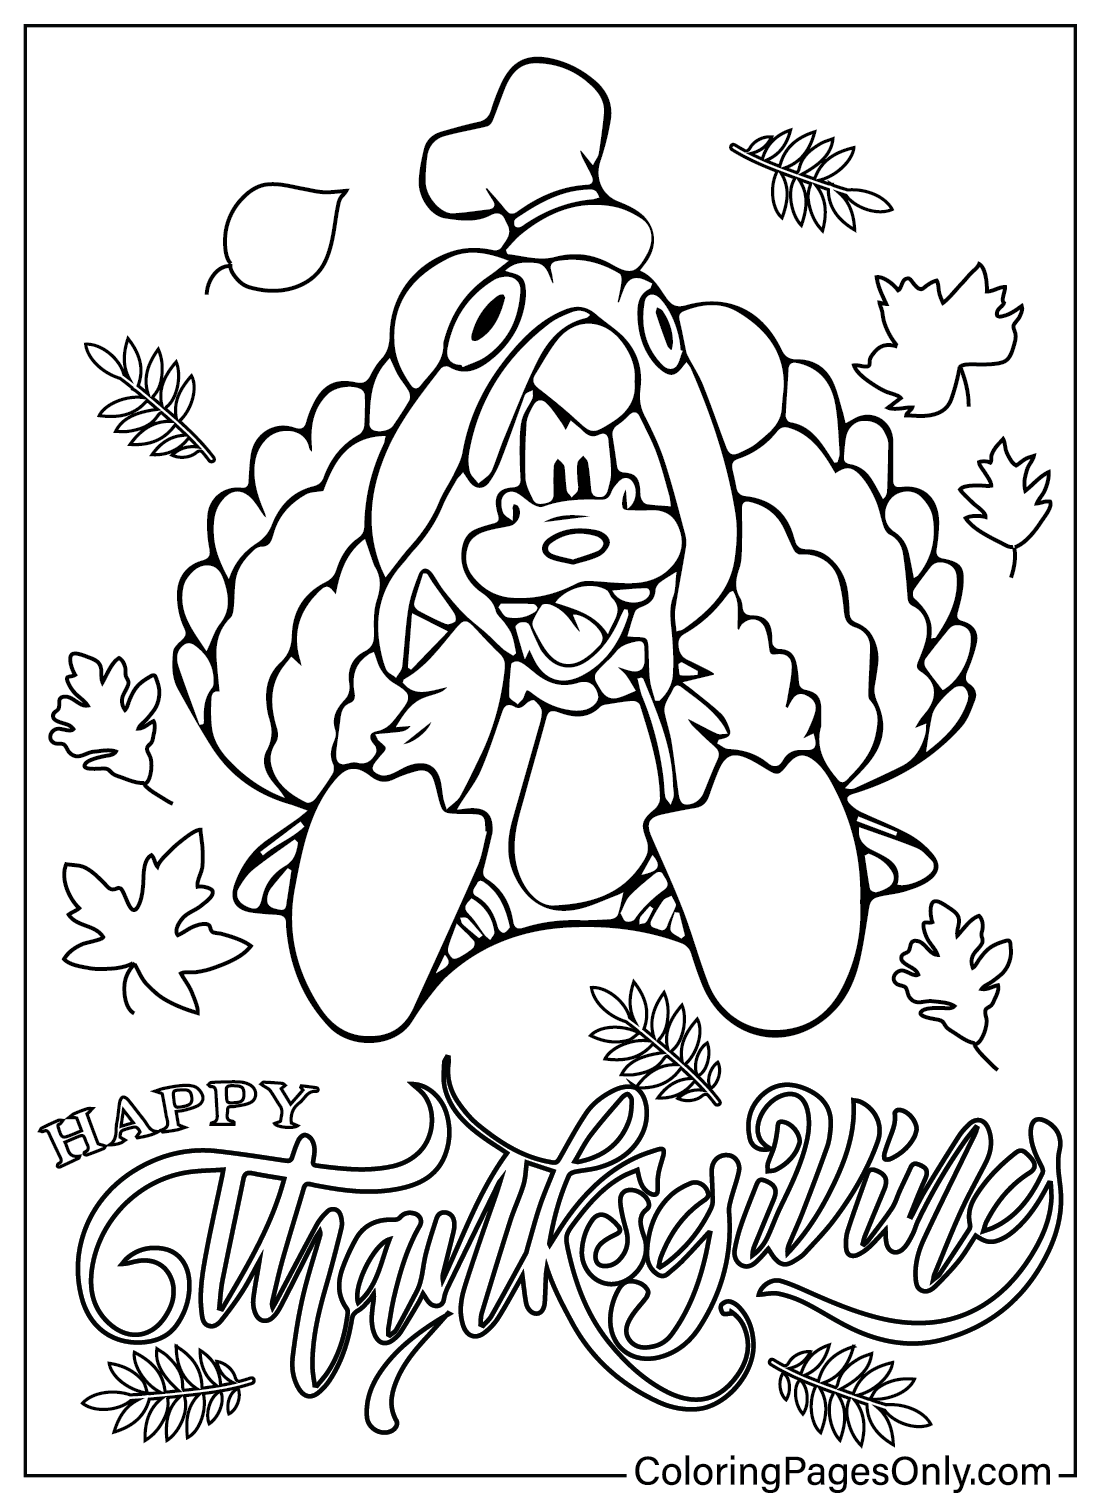 Disney Goofy Thanksgiving Coloring Page from Disney Thanksgiving